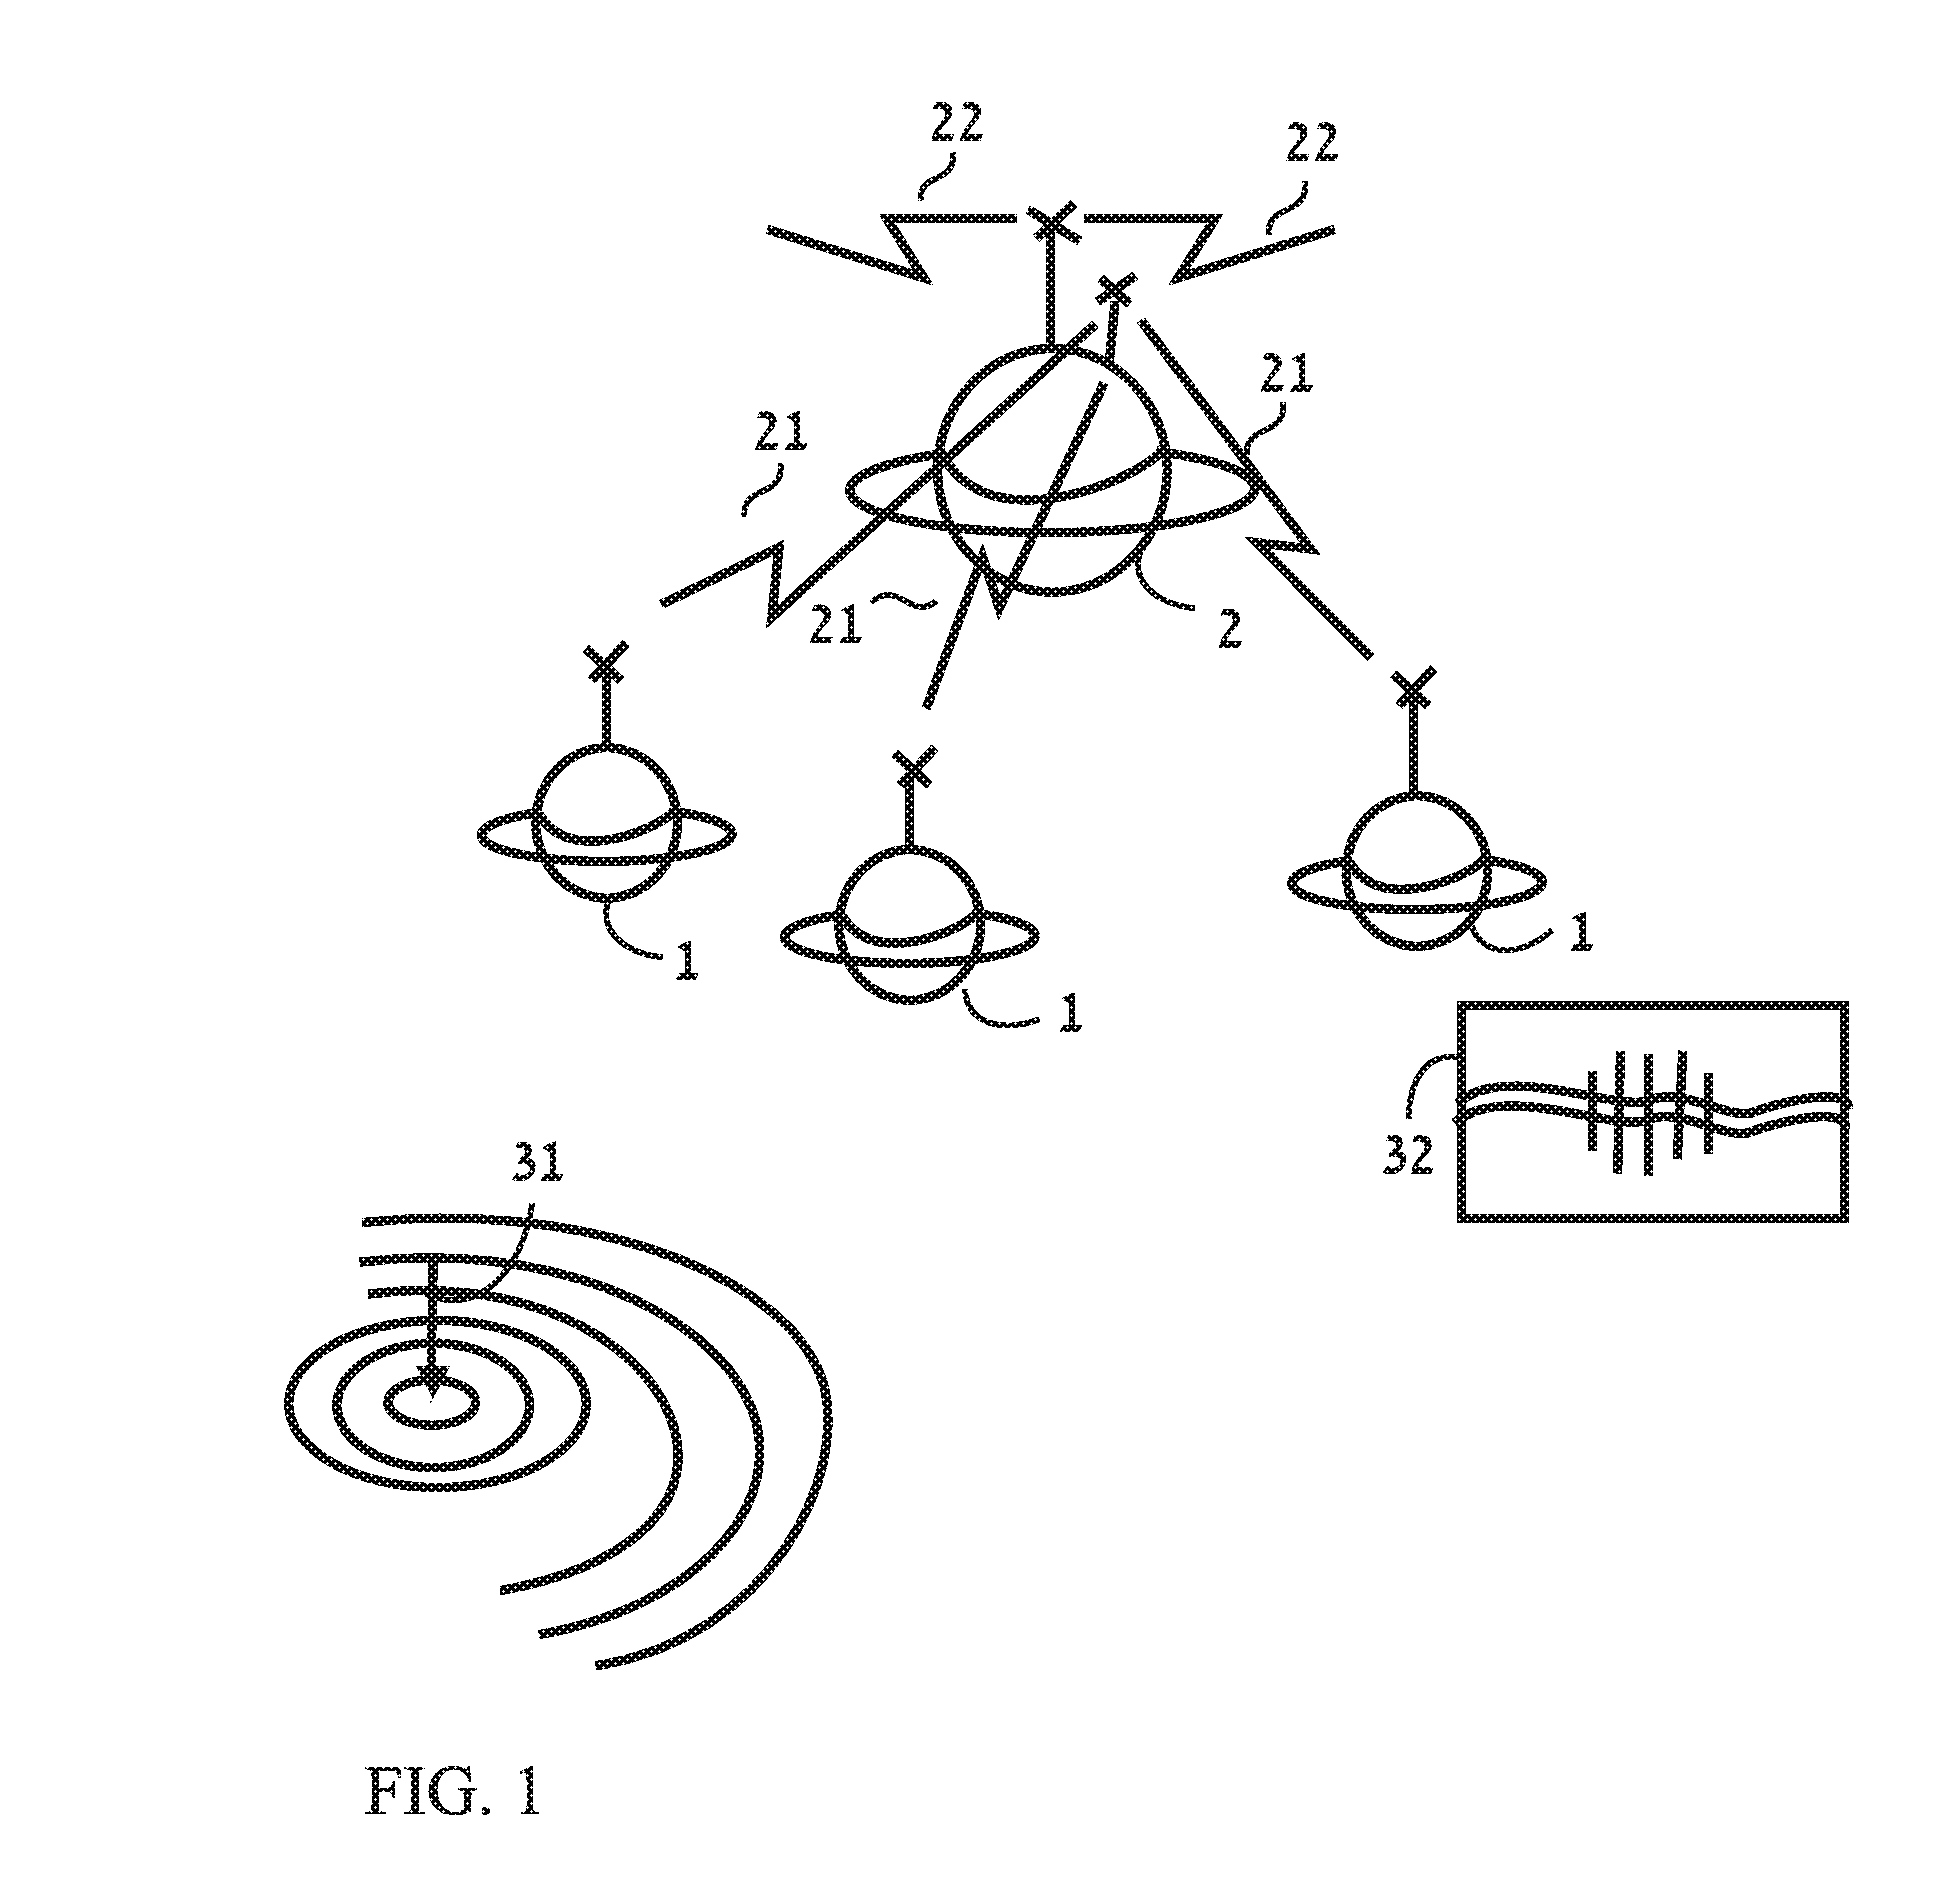 Method for detecting leakage from a pipe